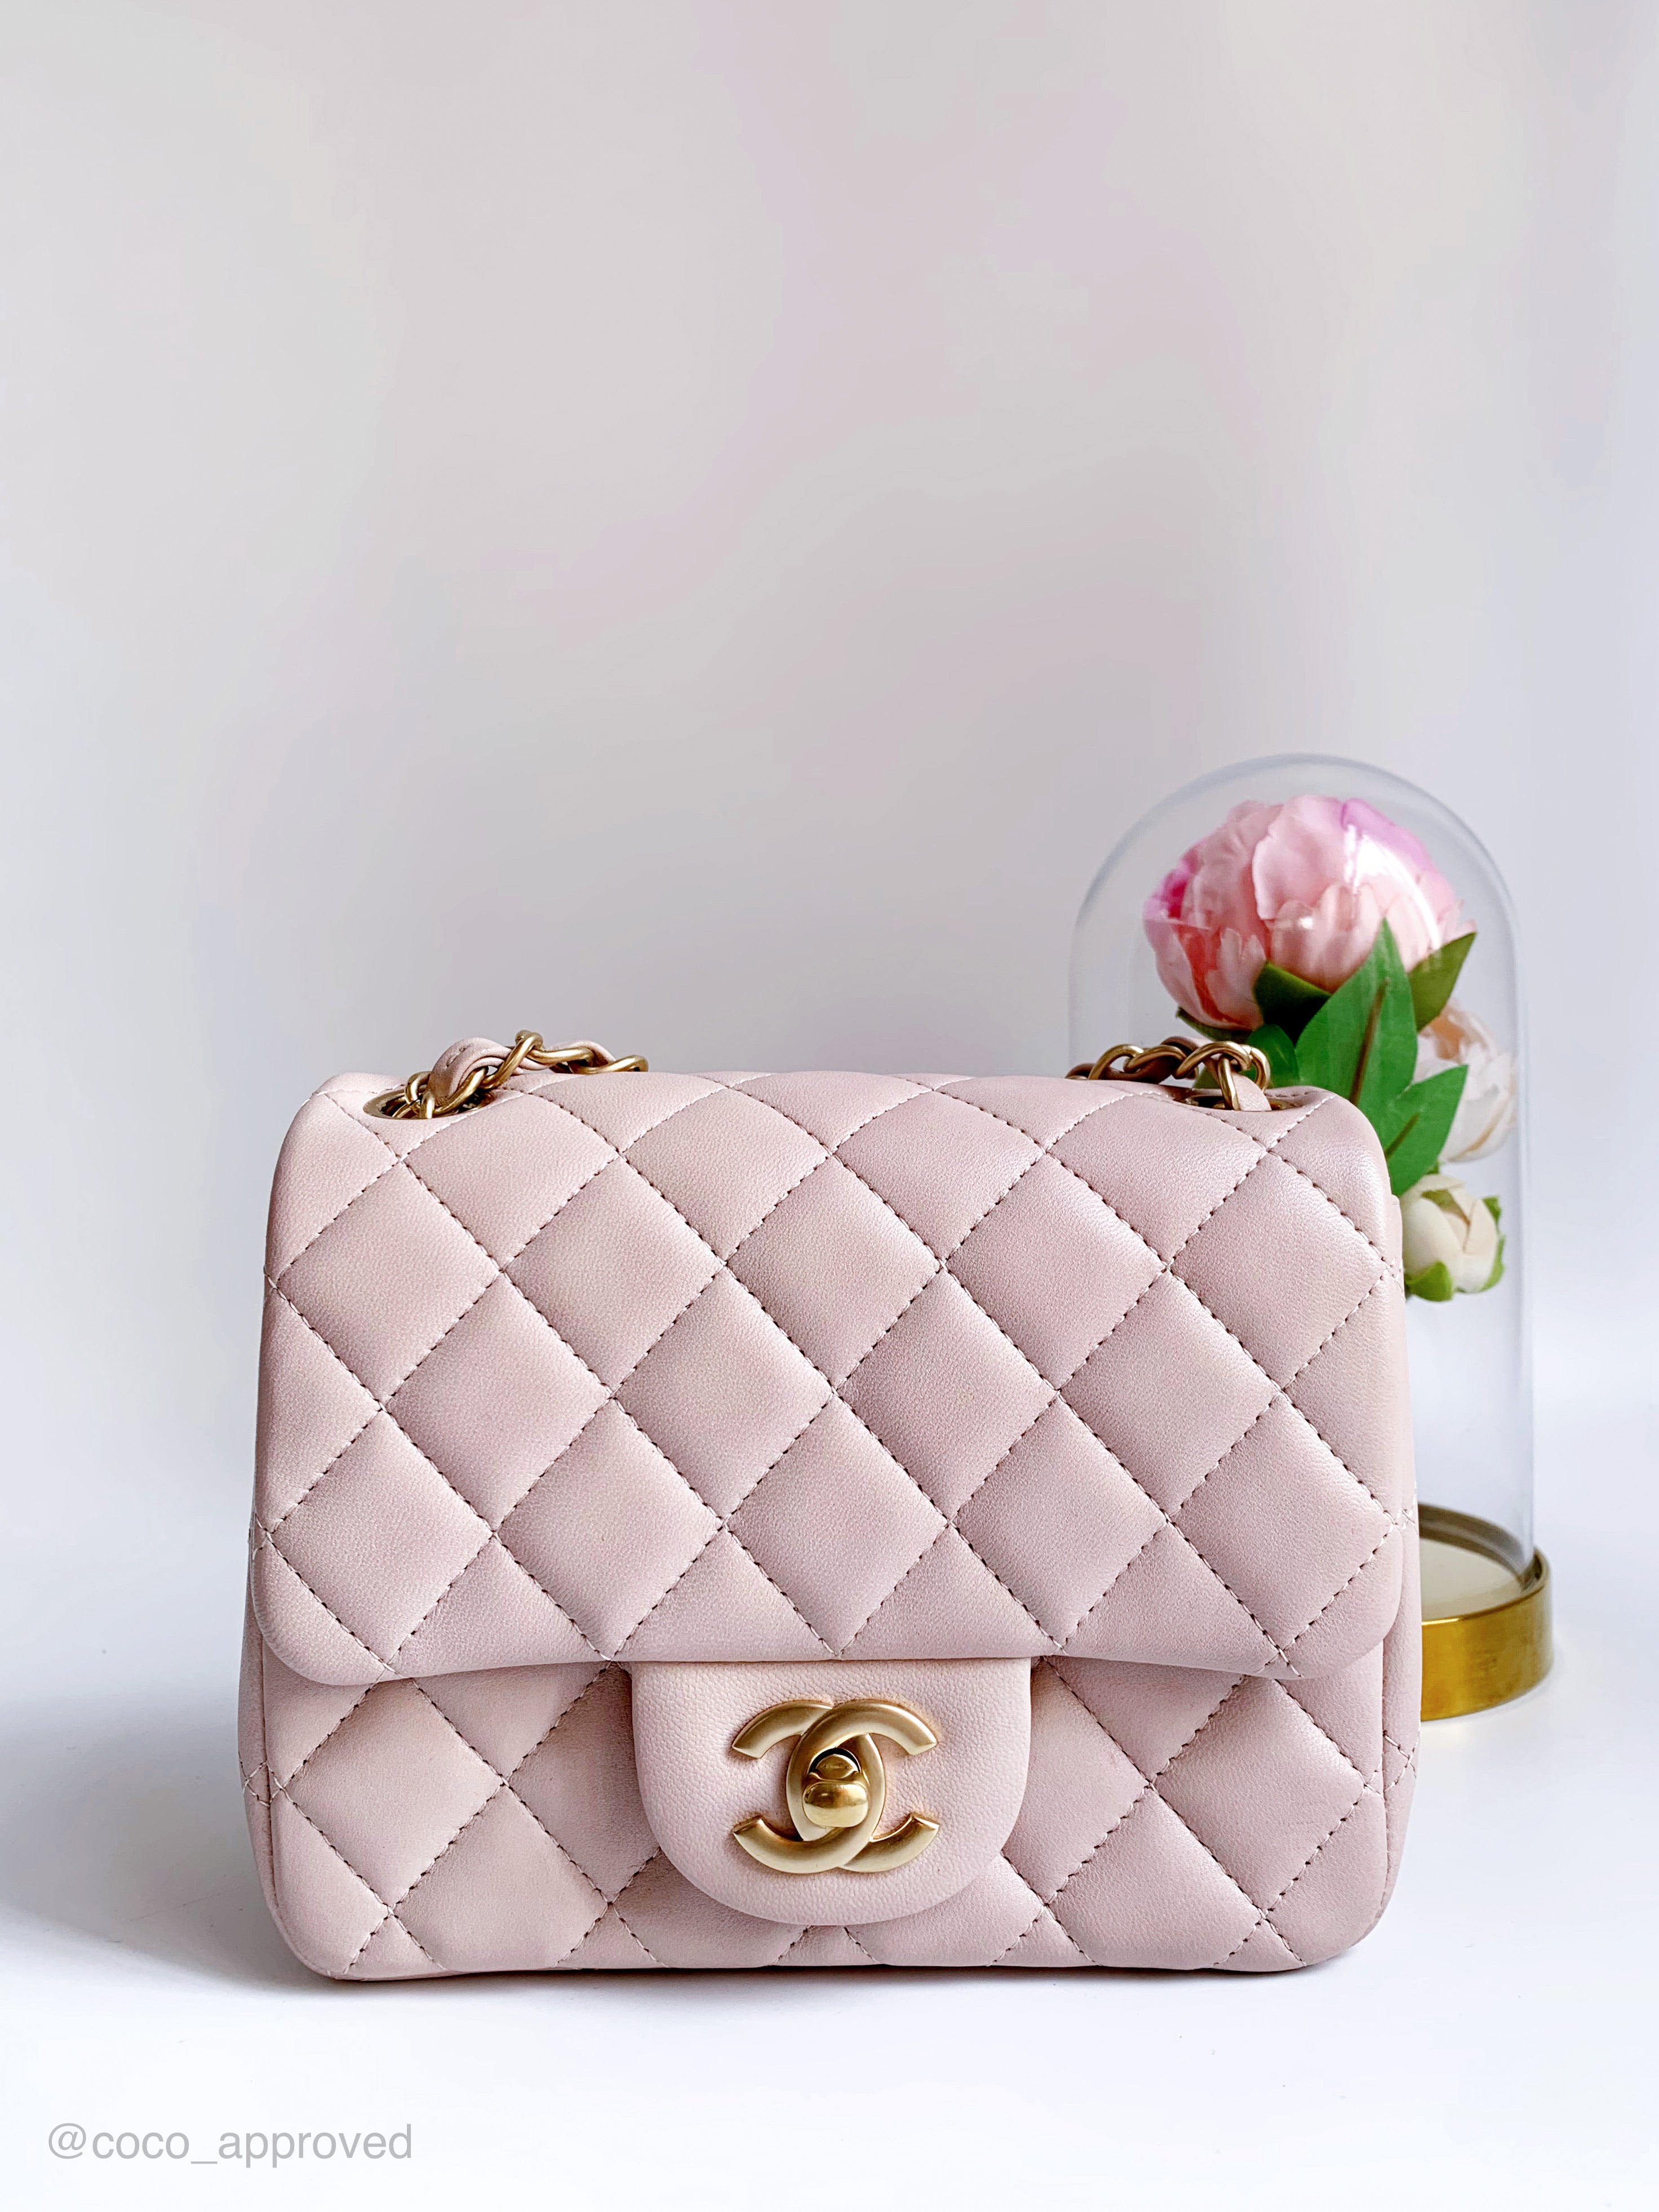 Chanel Mini Timeless Classic Flap Bag in Baby Pink Lambskin with Gold  Hardware - SOLD